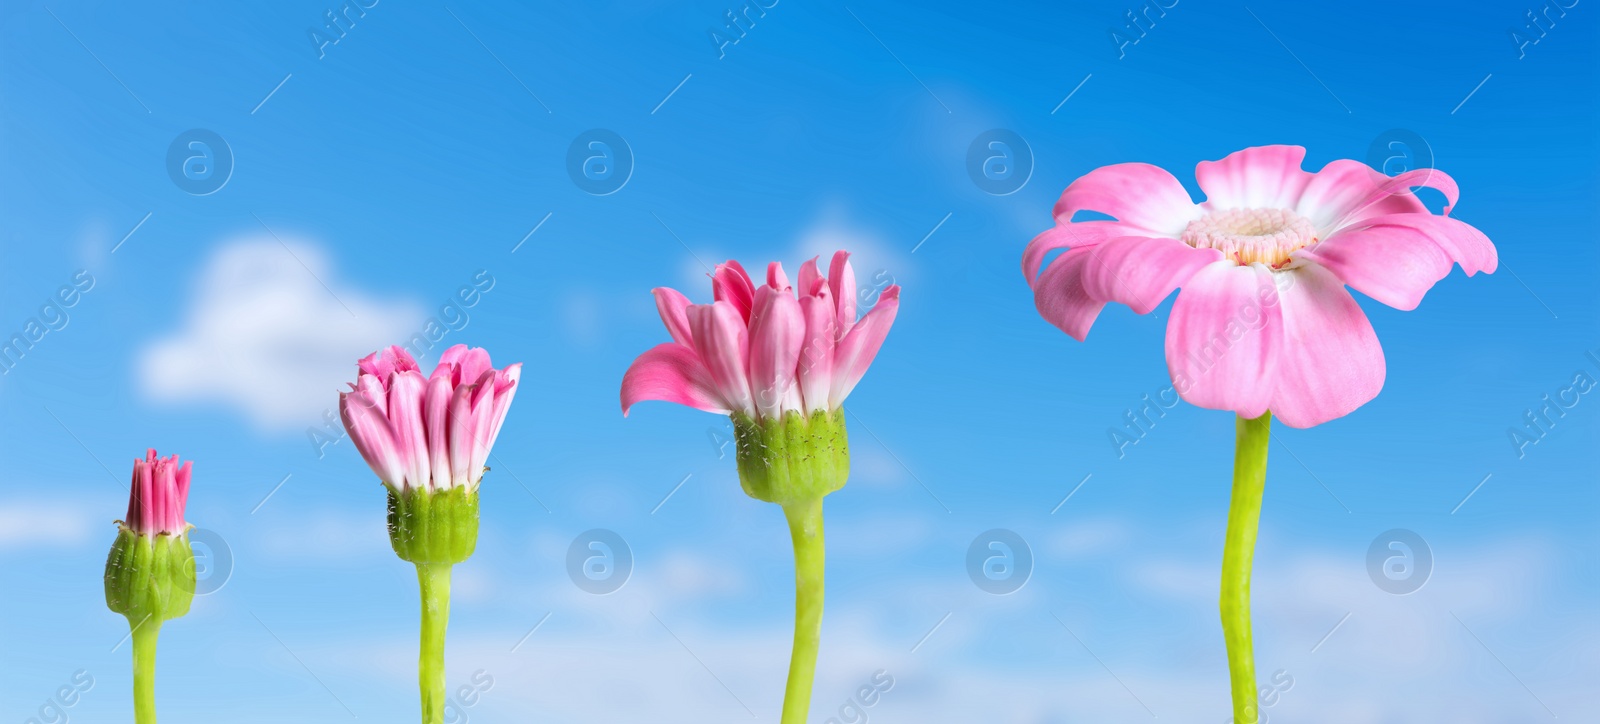 Image of Blooming stages of pink daisy flower against sky